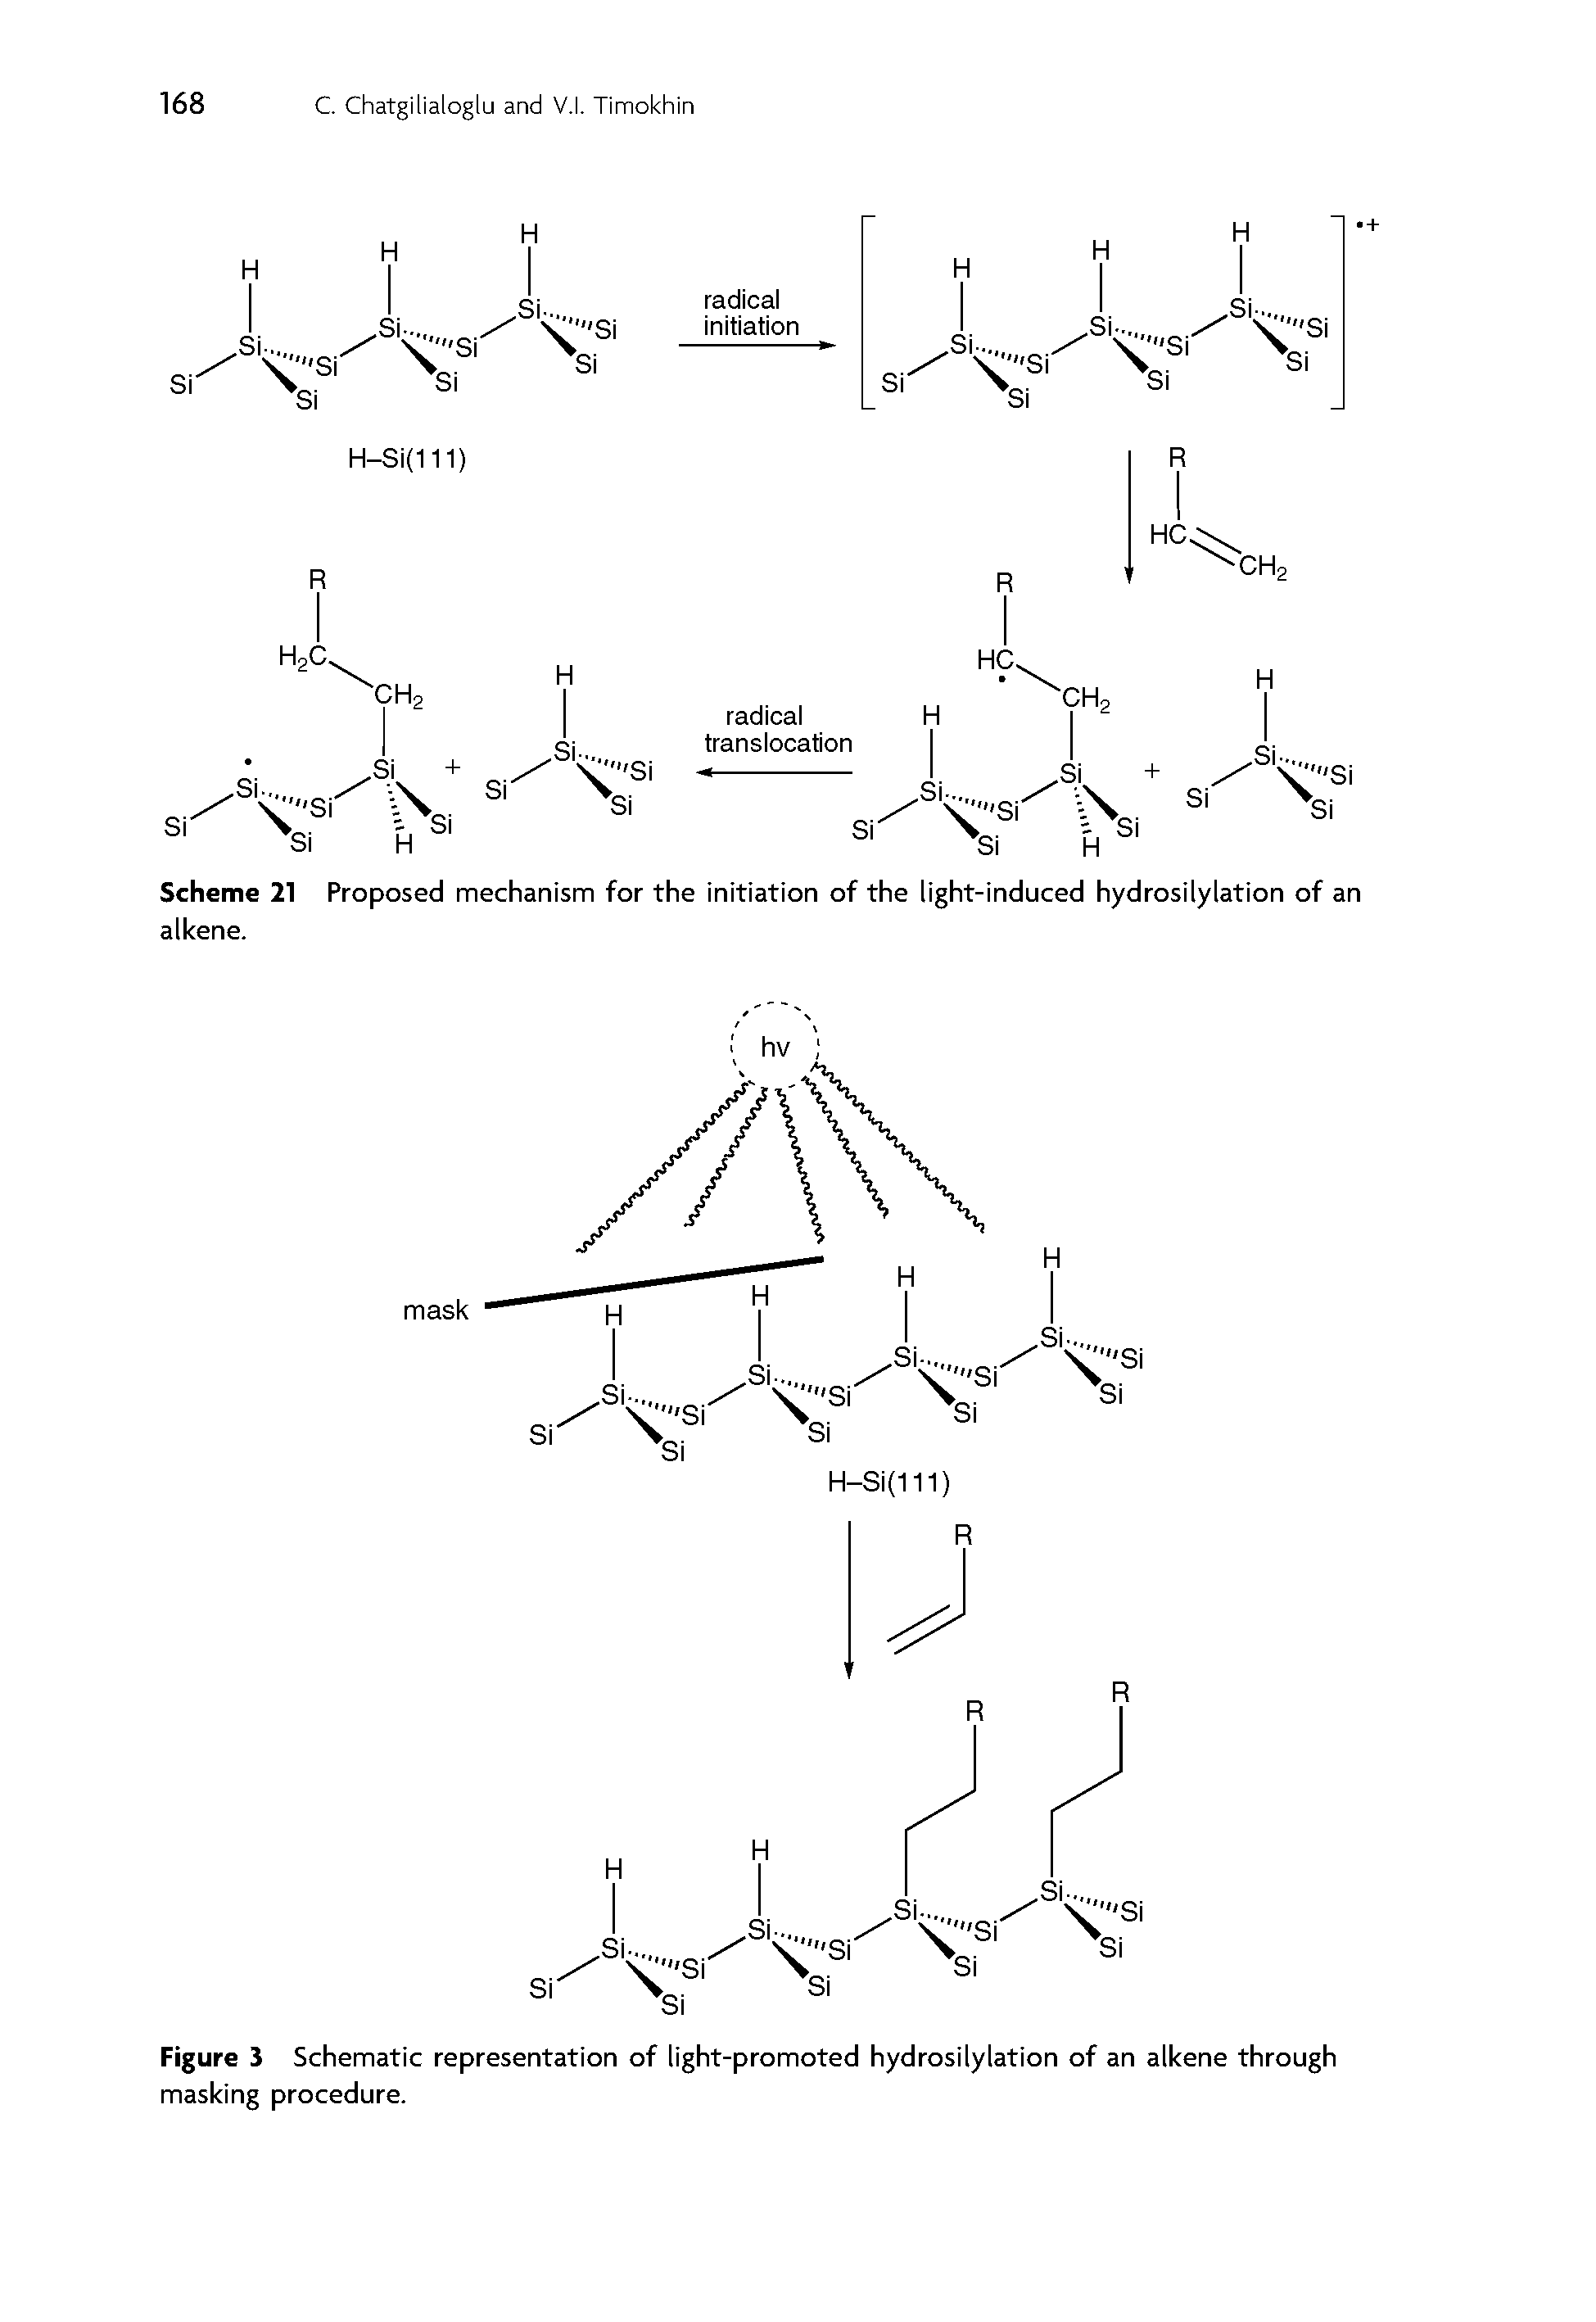 Scheme 21 Proposed mechanism for the initiation of the light-induced hydrosilylation of an alkene.